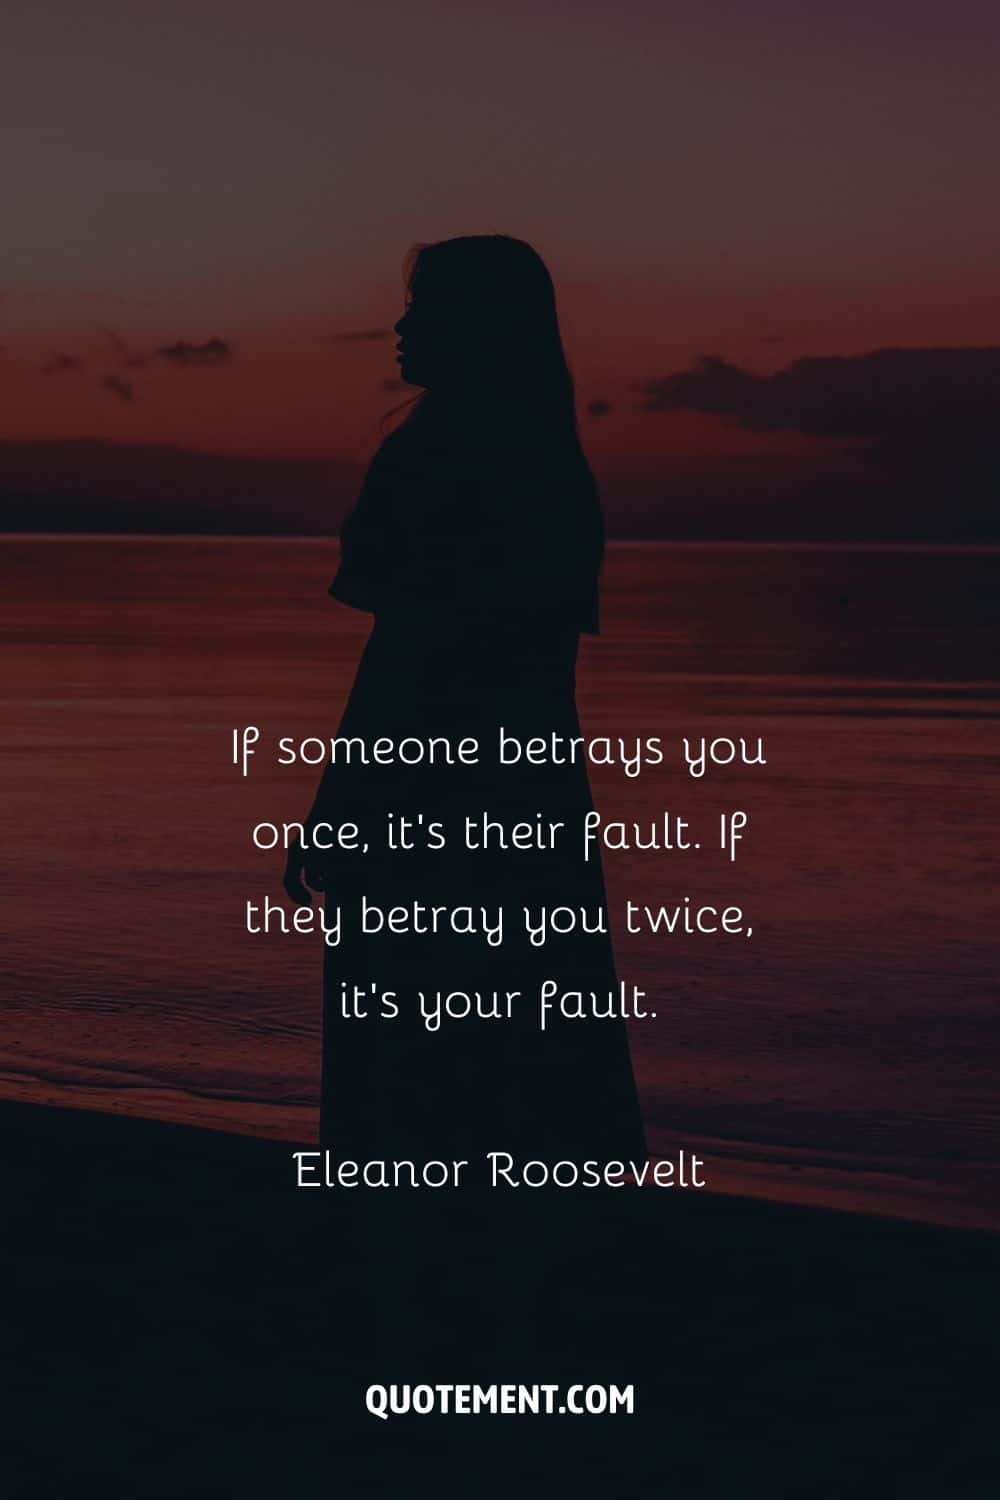 “If someone betrays you once, it's their fault. If they betray you twice, it's your fault.” — Eleanor Roosevelt